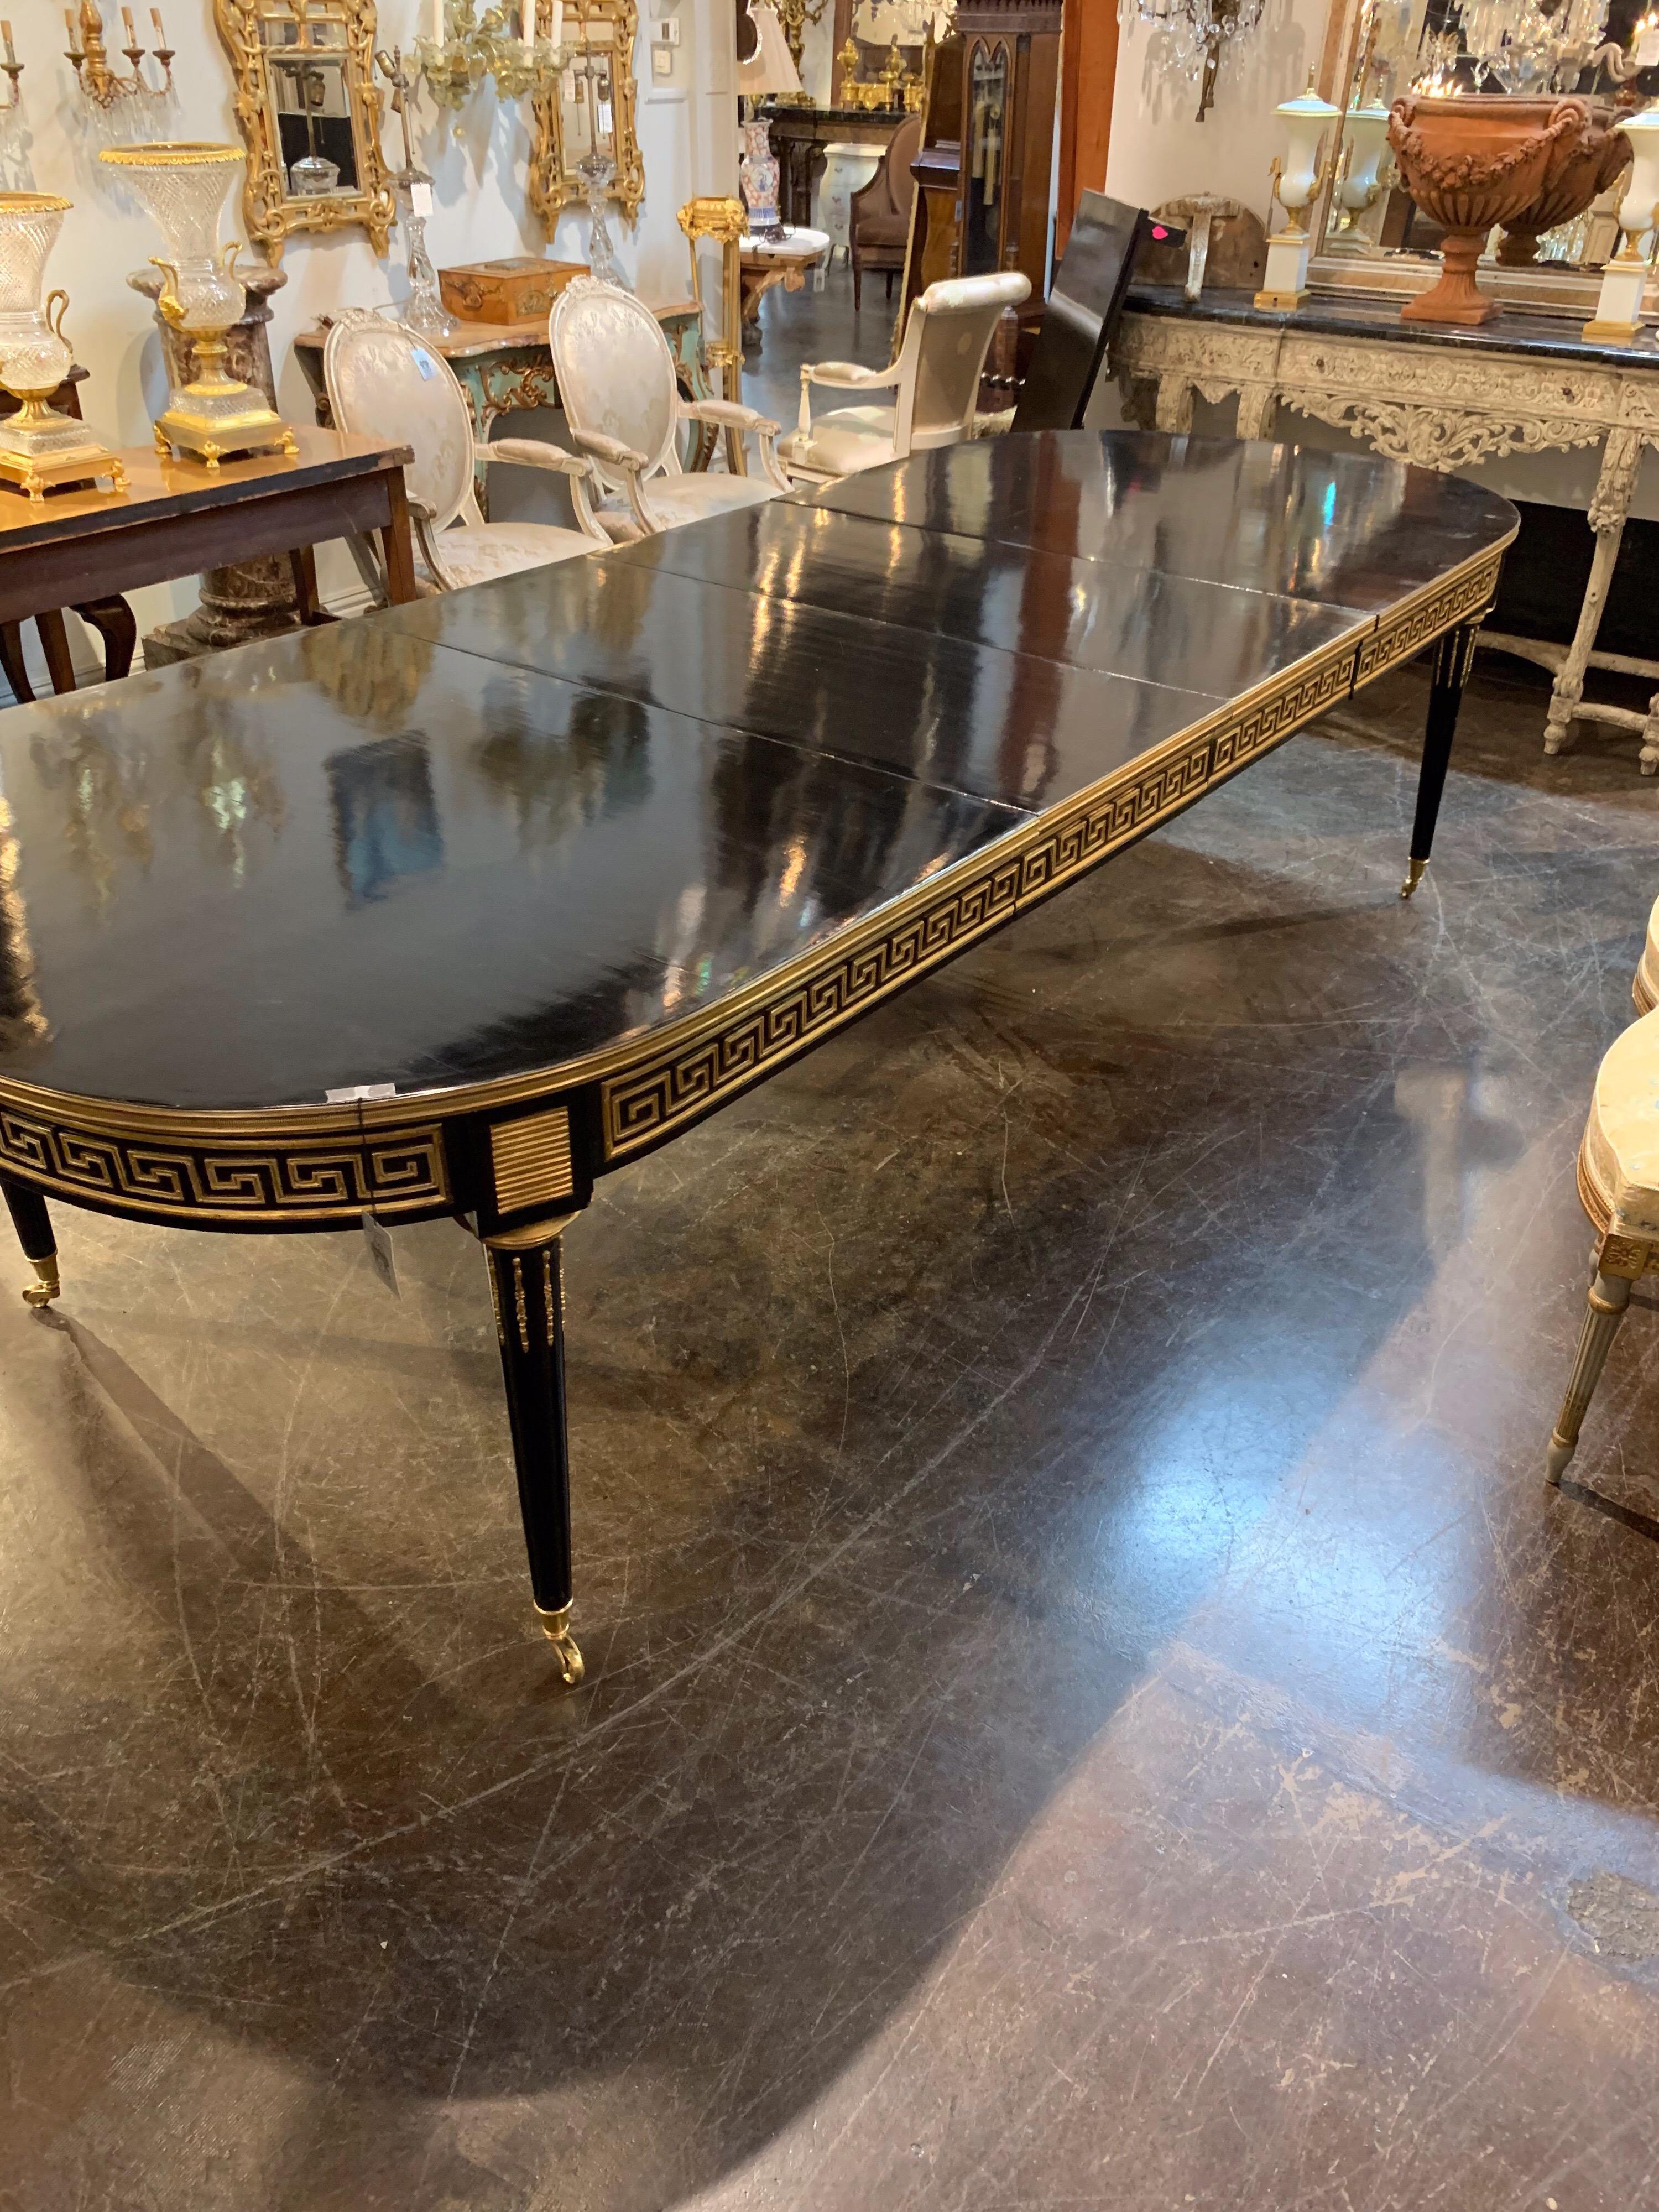 Gorgeous Jansen Manner Louis XVI Style black lacquer dining table. The table has an additional leaf and 2 additional legs for support (not shown). Fabulous gilt bronze with Greek Key design around the apron. There are minor blemishes consistent with